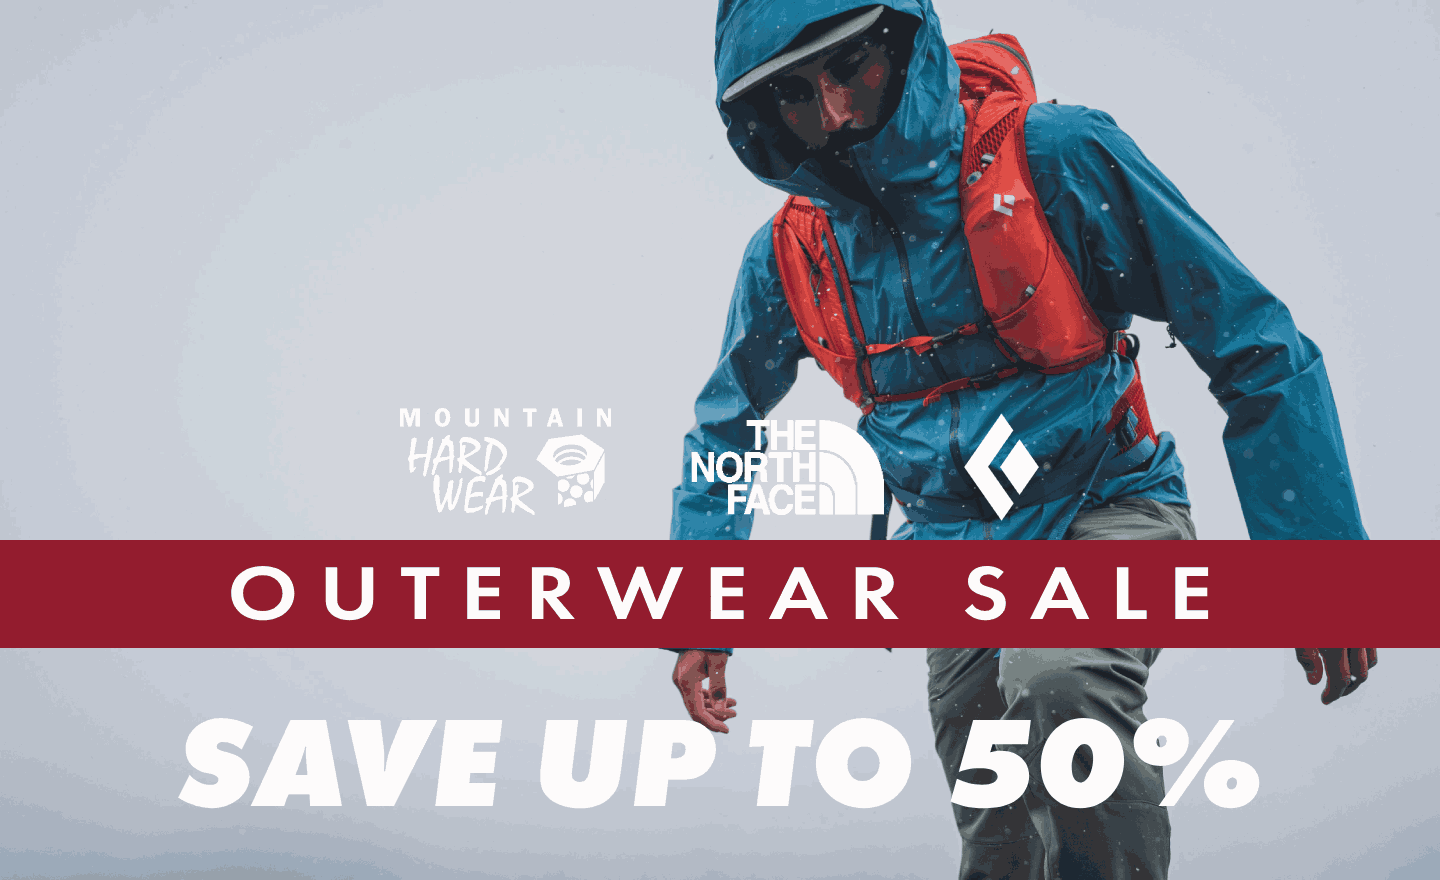 Outerwear Sale Save Up To 50%